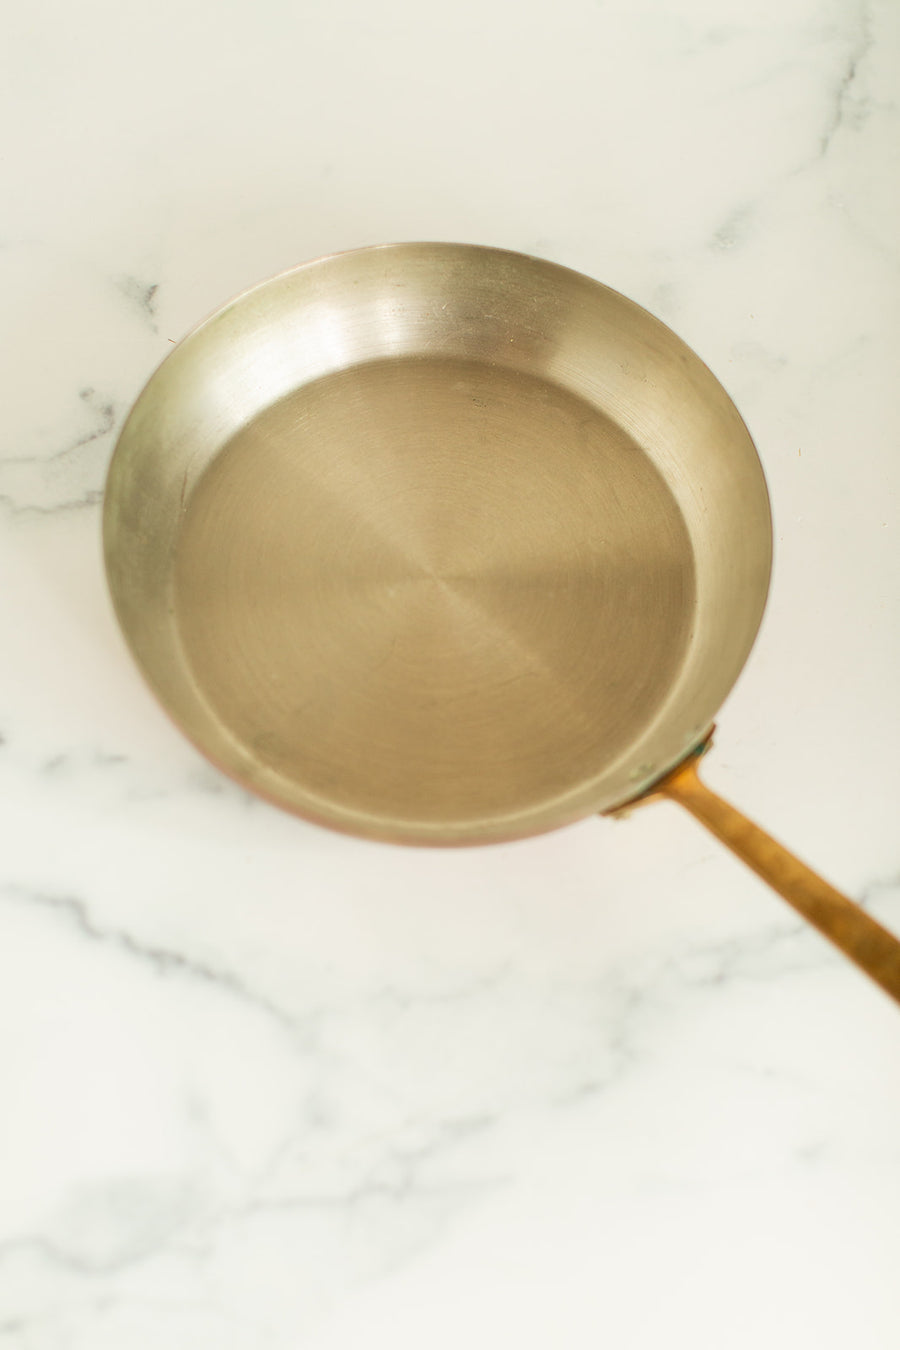 Copper and Brass Pan